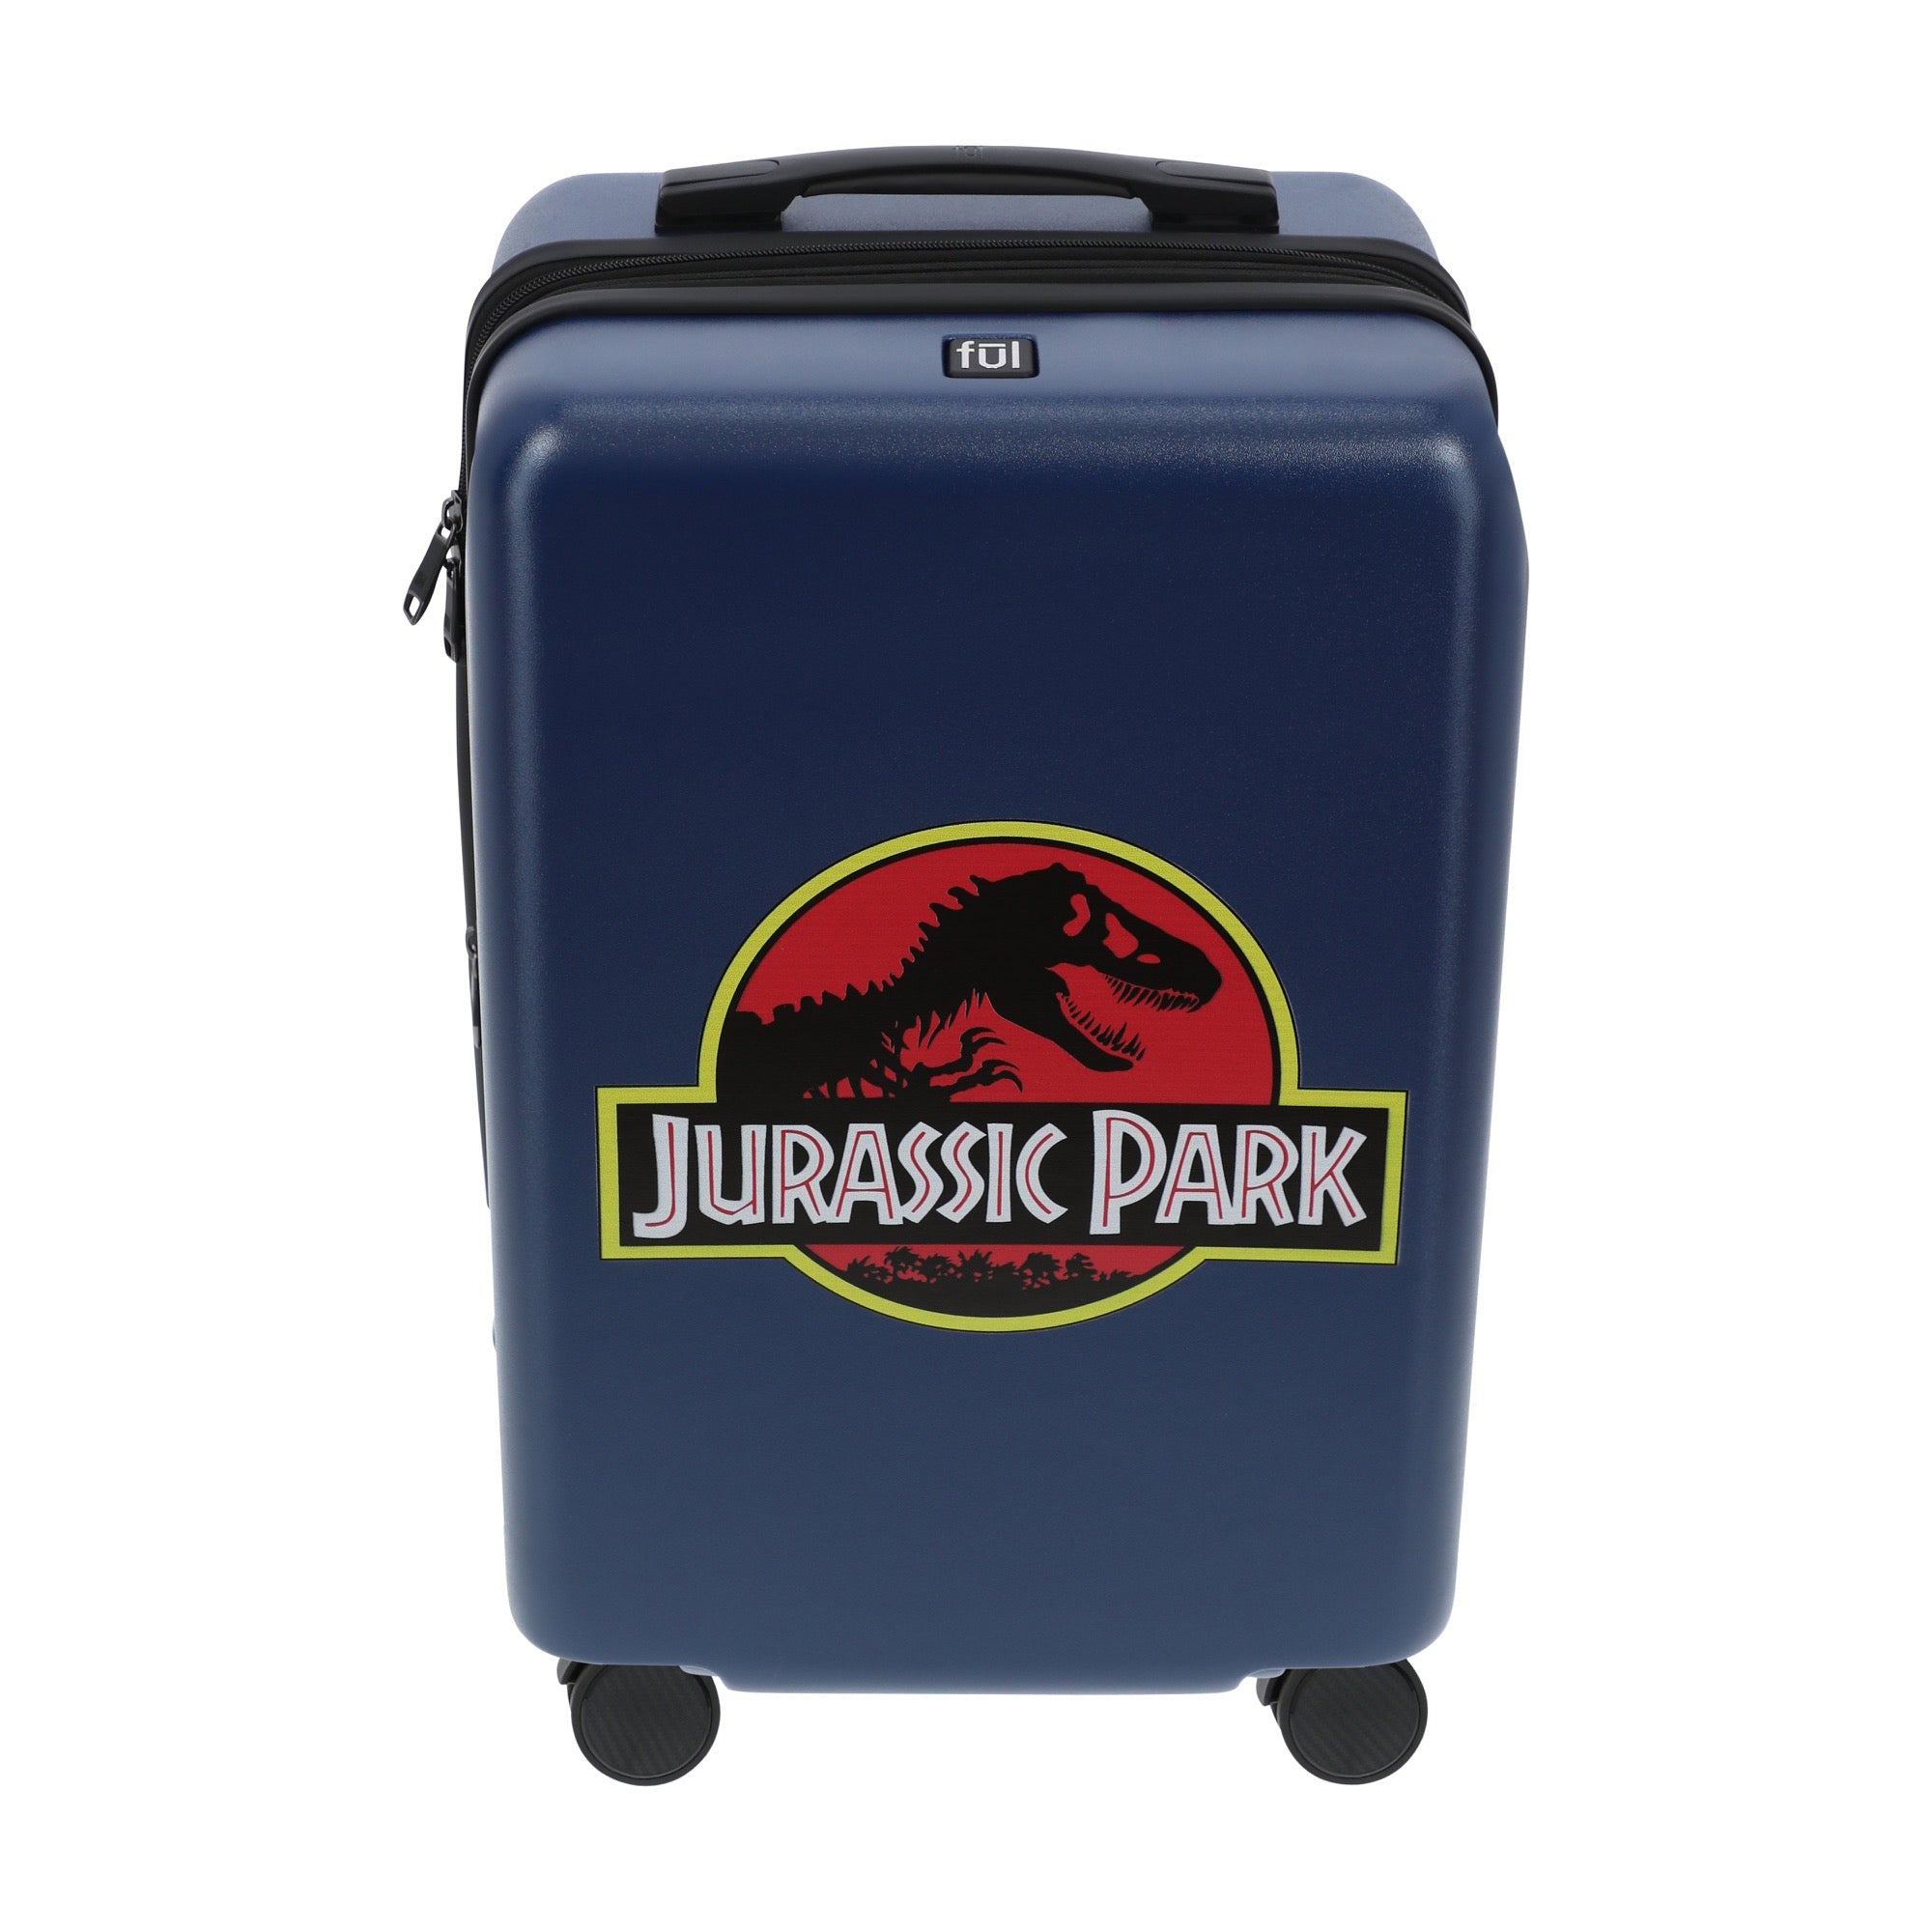 Navy blue NBC studios jurassic park 22.5" carry-on spinner suitcase luggage by Ful